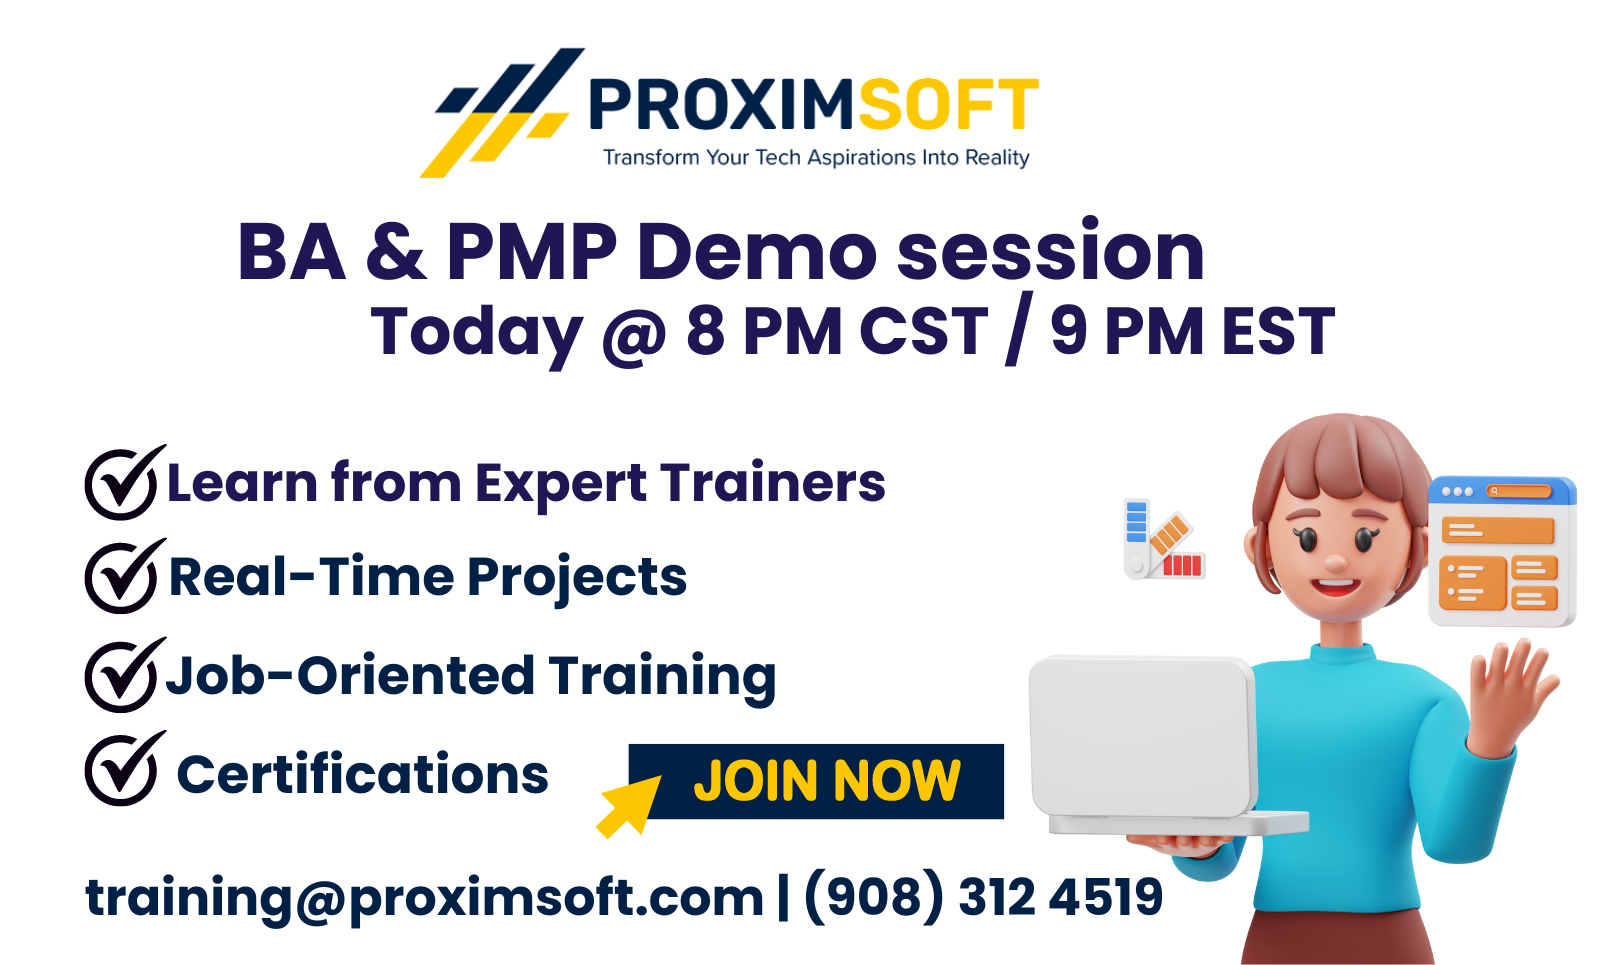 BA & PMP Double Power! Free Demo Today-Proximsoft.com - Los Angeles Professional Services